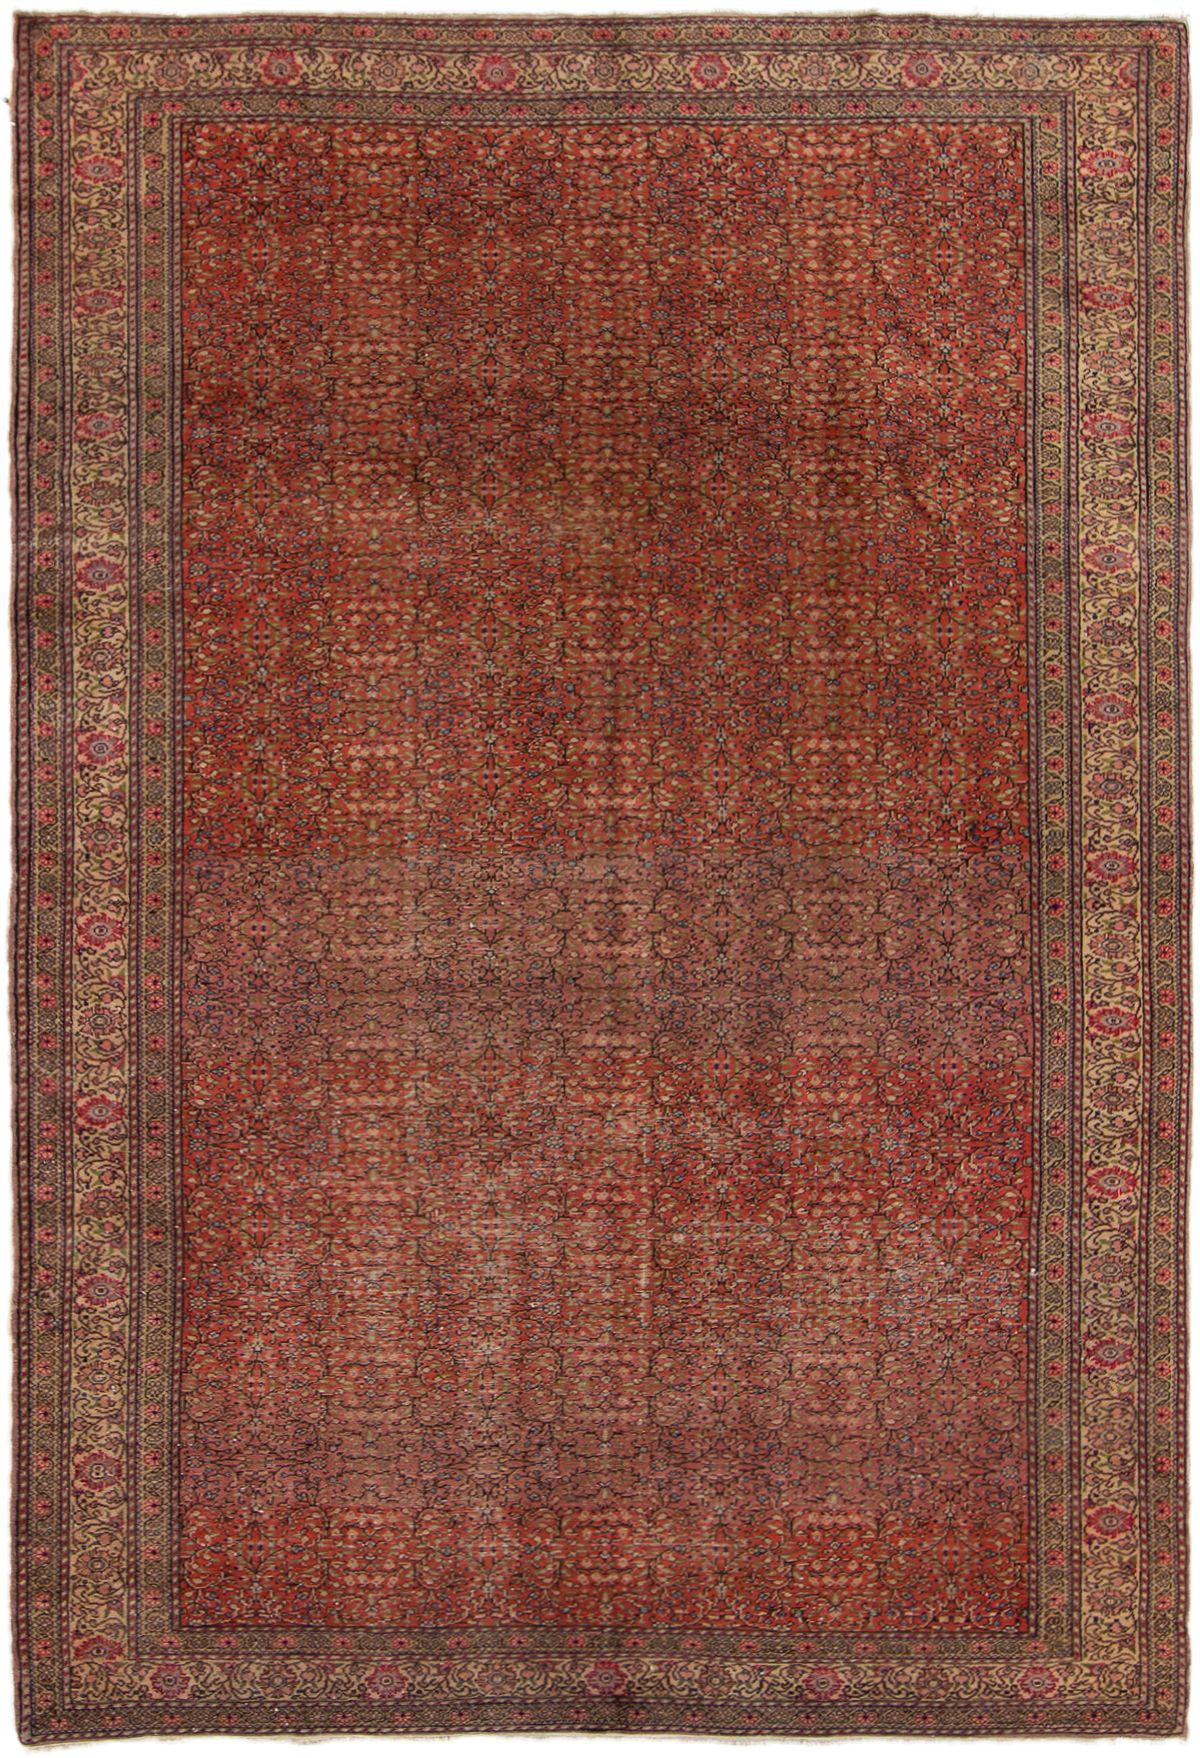 Hand-knotted Anatolian Authentic Geometric Wool Rug 6'5" x 9'6" Size: 6'5" x 9'6"  